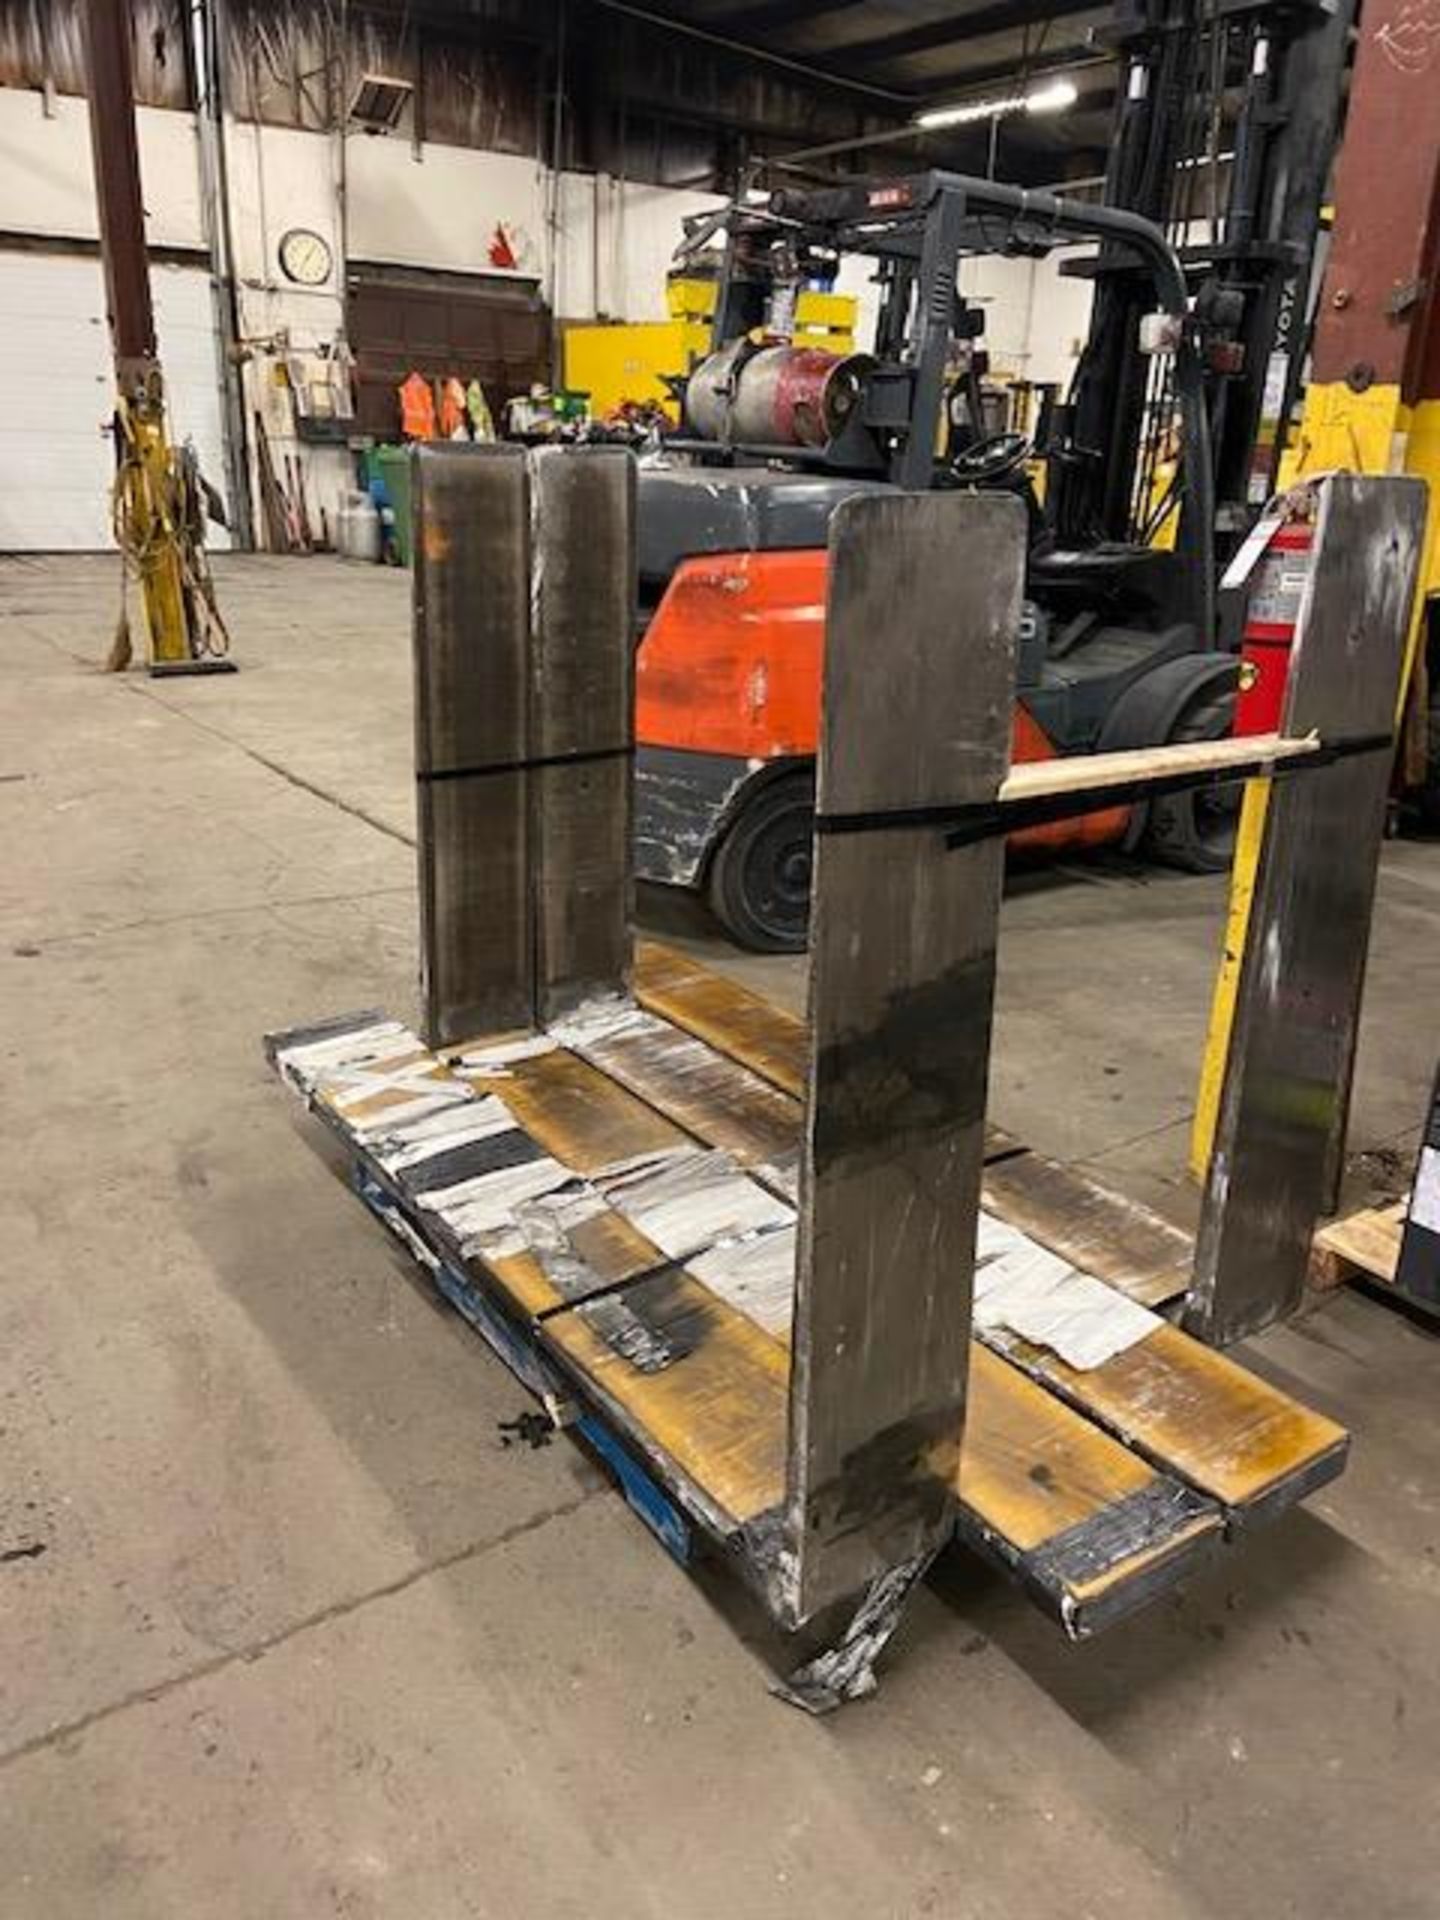 Lot of 2 Gyprock Forklift Forks (1 complete set of 2) CLASS 4 - 48" Long 10" wide HEAVY DUTY 6